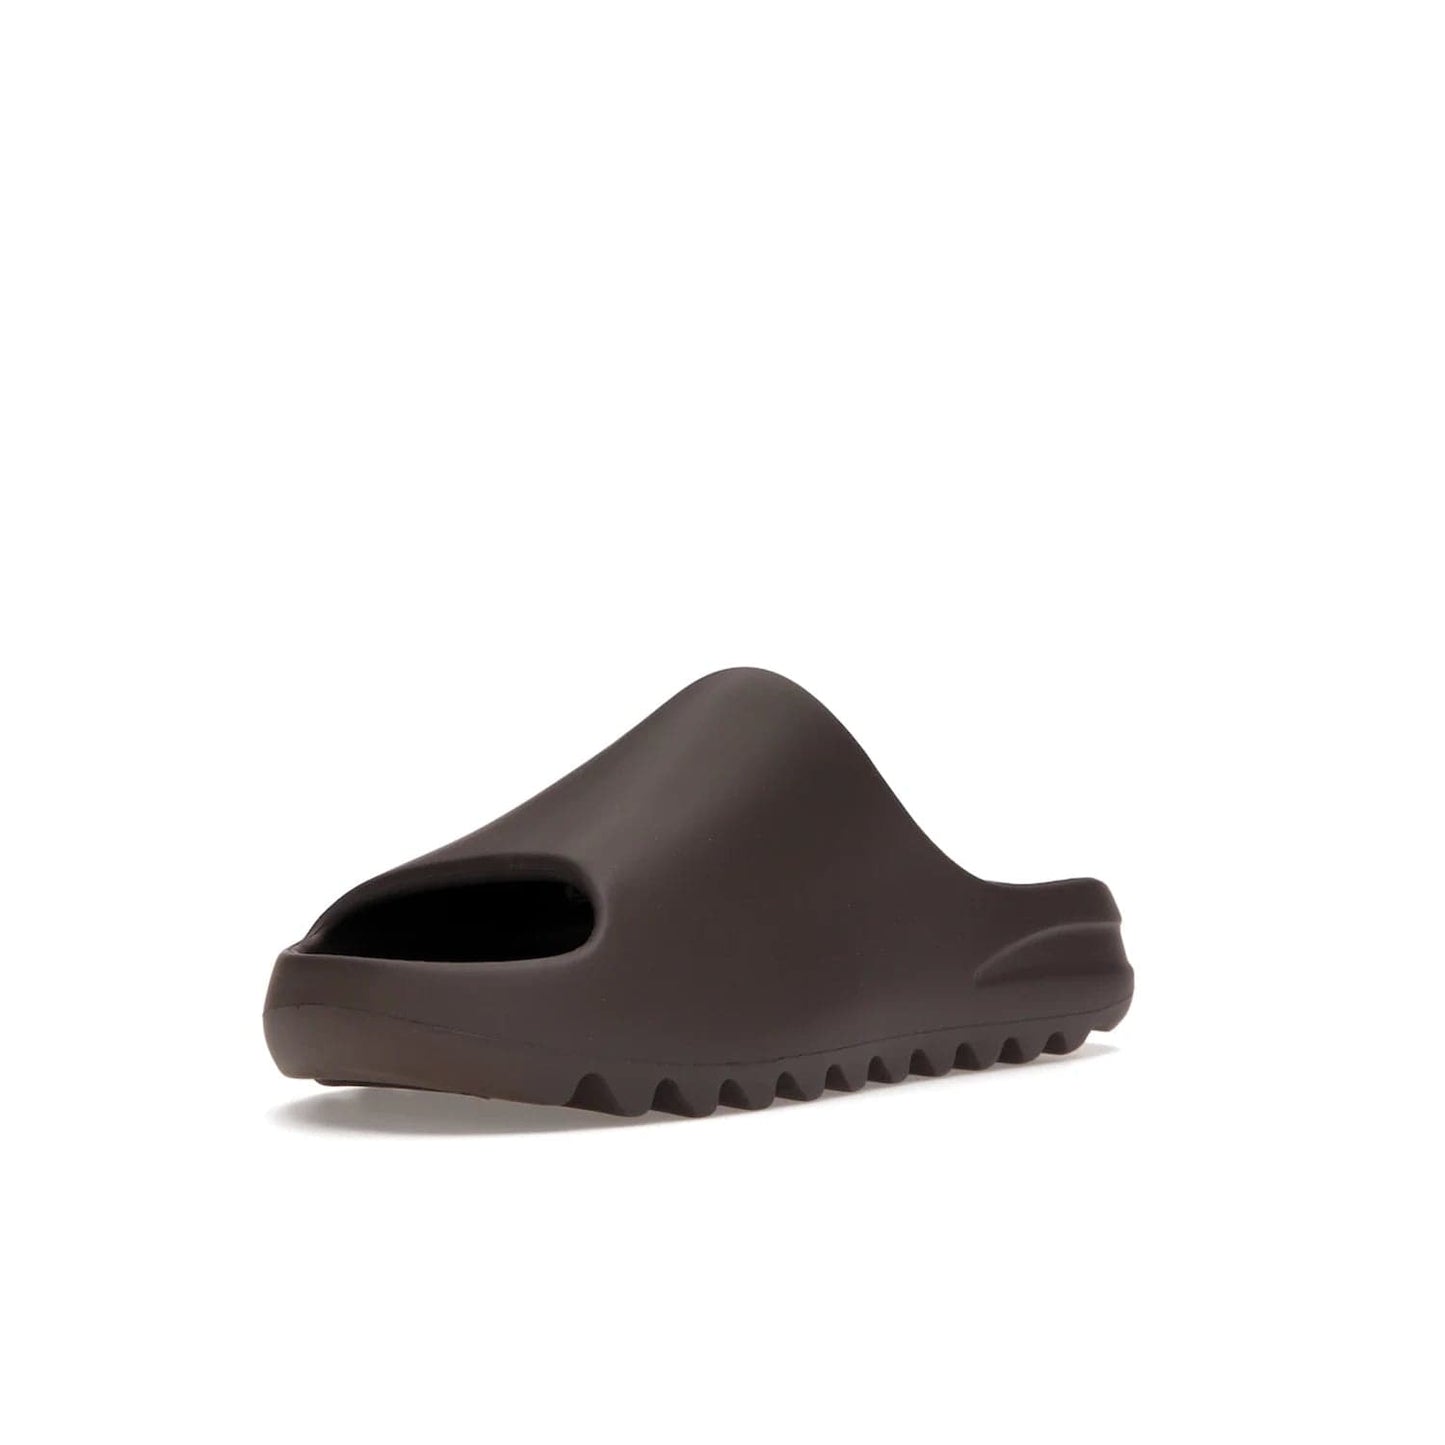 adidas Yeezy Slide Soot - Image 14 - Only at www.BallersClubKickz.com - Shop the Yeezy Slide Soot sneaker by Adidas, a sleek blend of form and function. Monochrome silhouette in Soot/Soot/Soot. Lightweight EVA foam offers comfort and durability. Get the must-have style today.